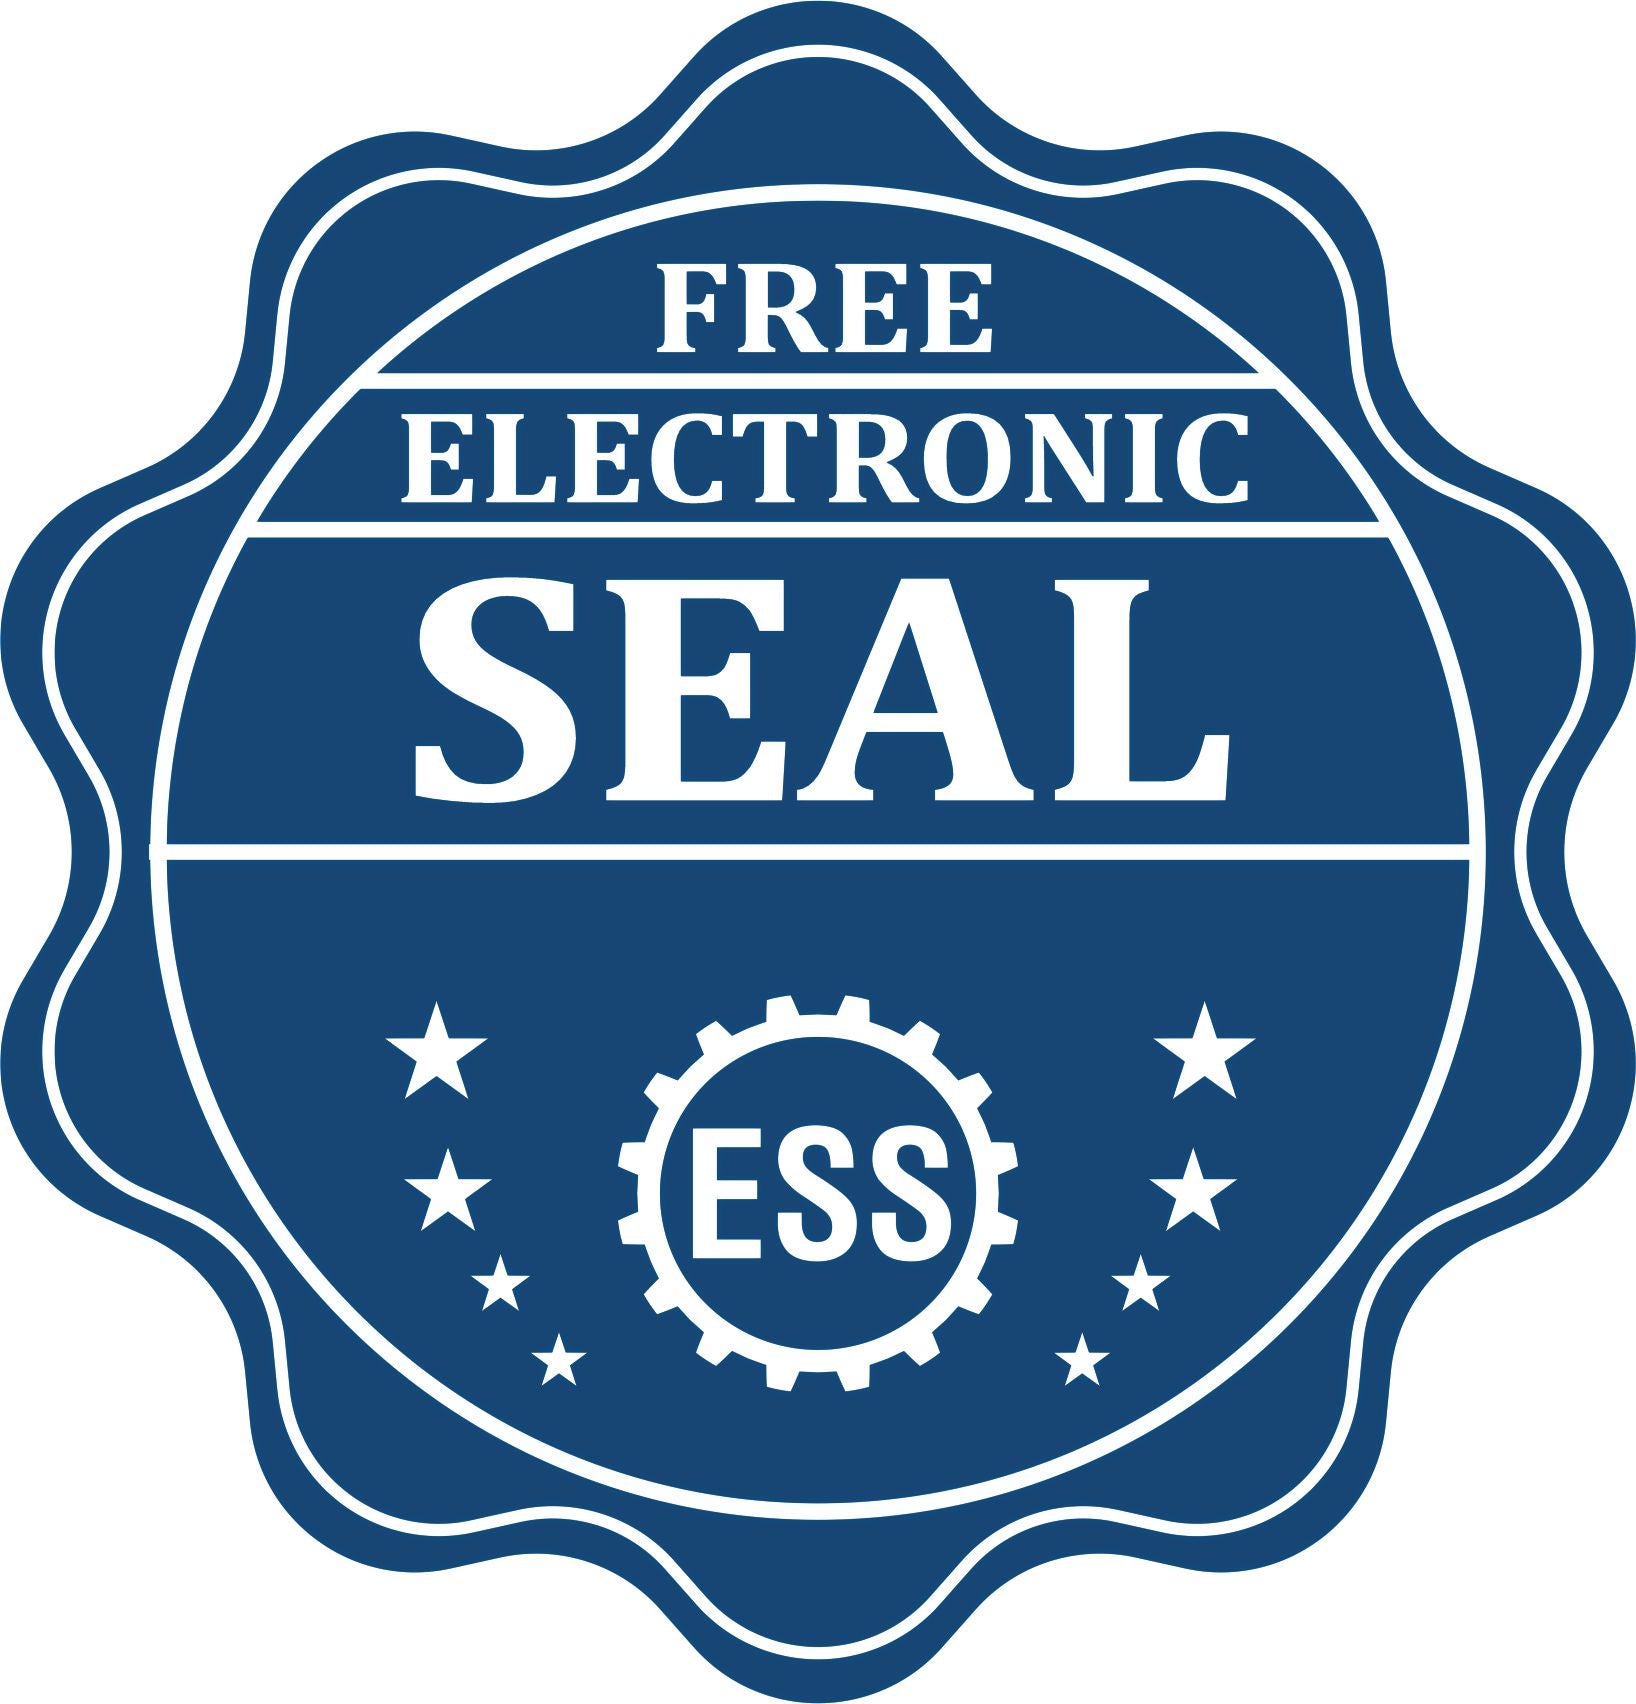 A badge showing a free electronic seal for the Gift Arkansas Architect Seal with stars and the ESS gear on the emblem.